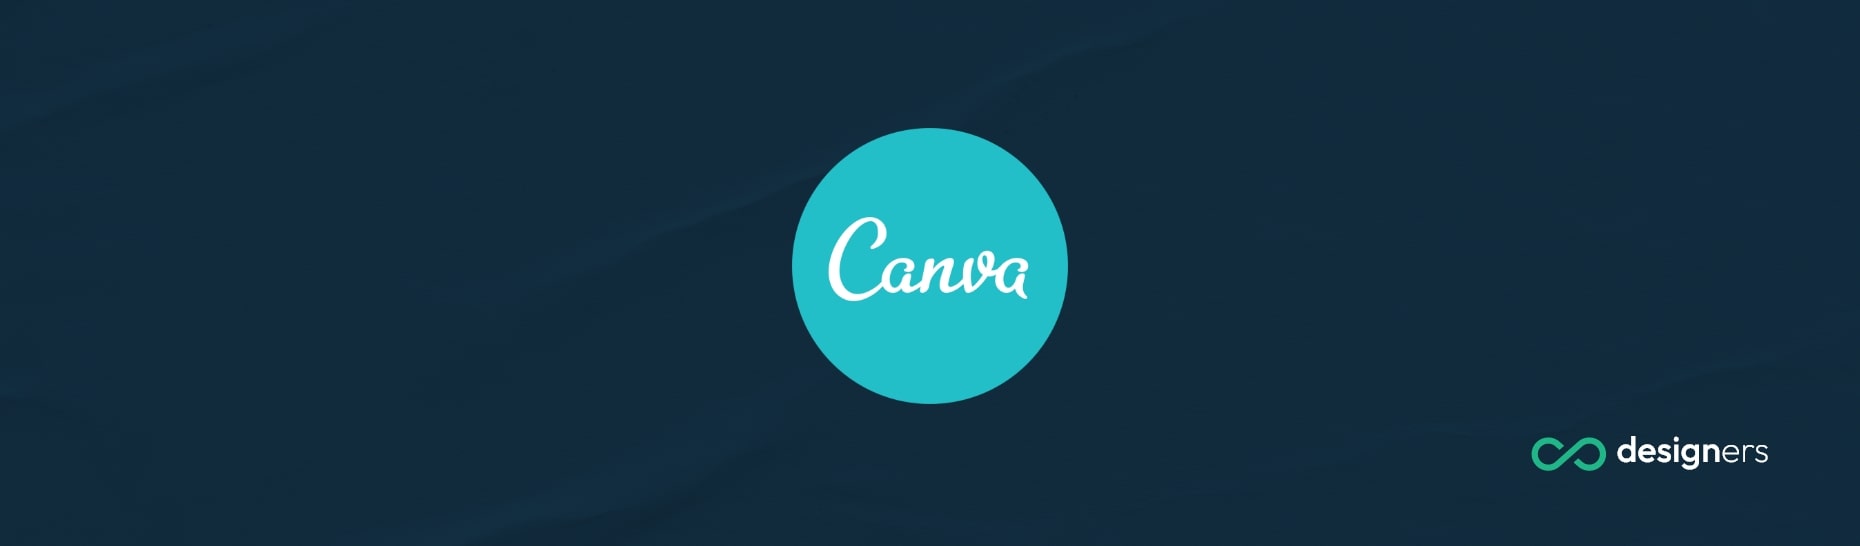 What Is the Meaning of Canva?